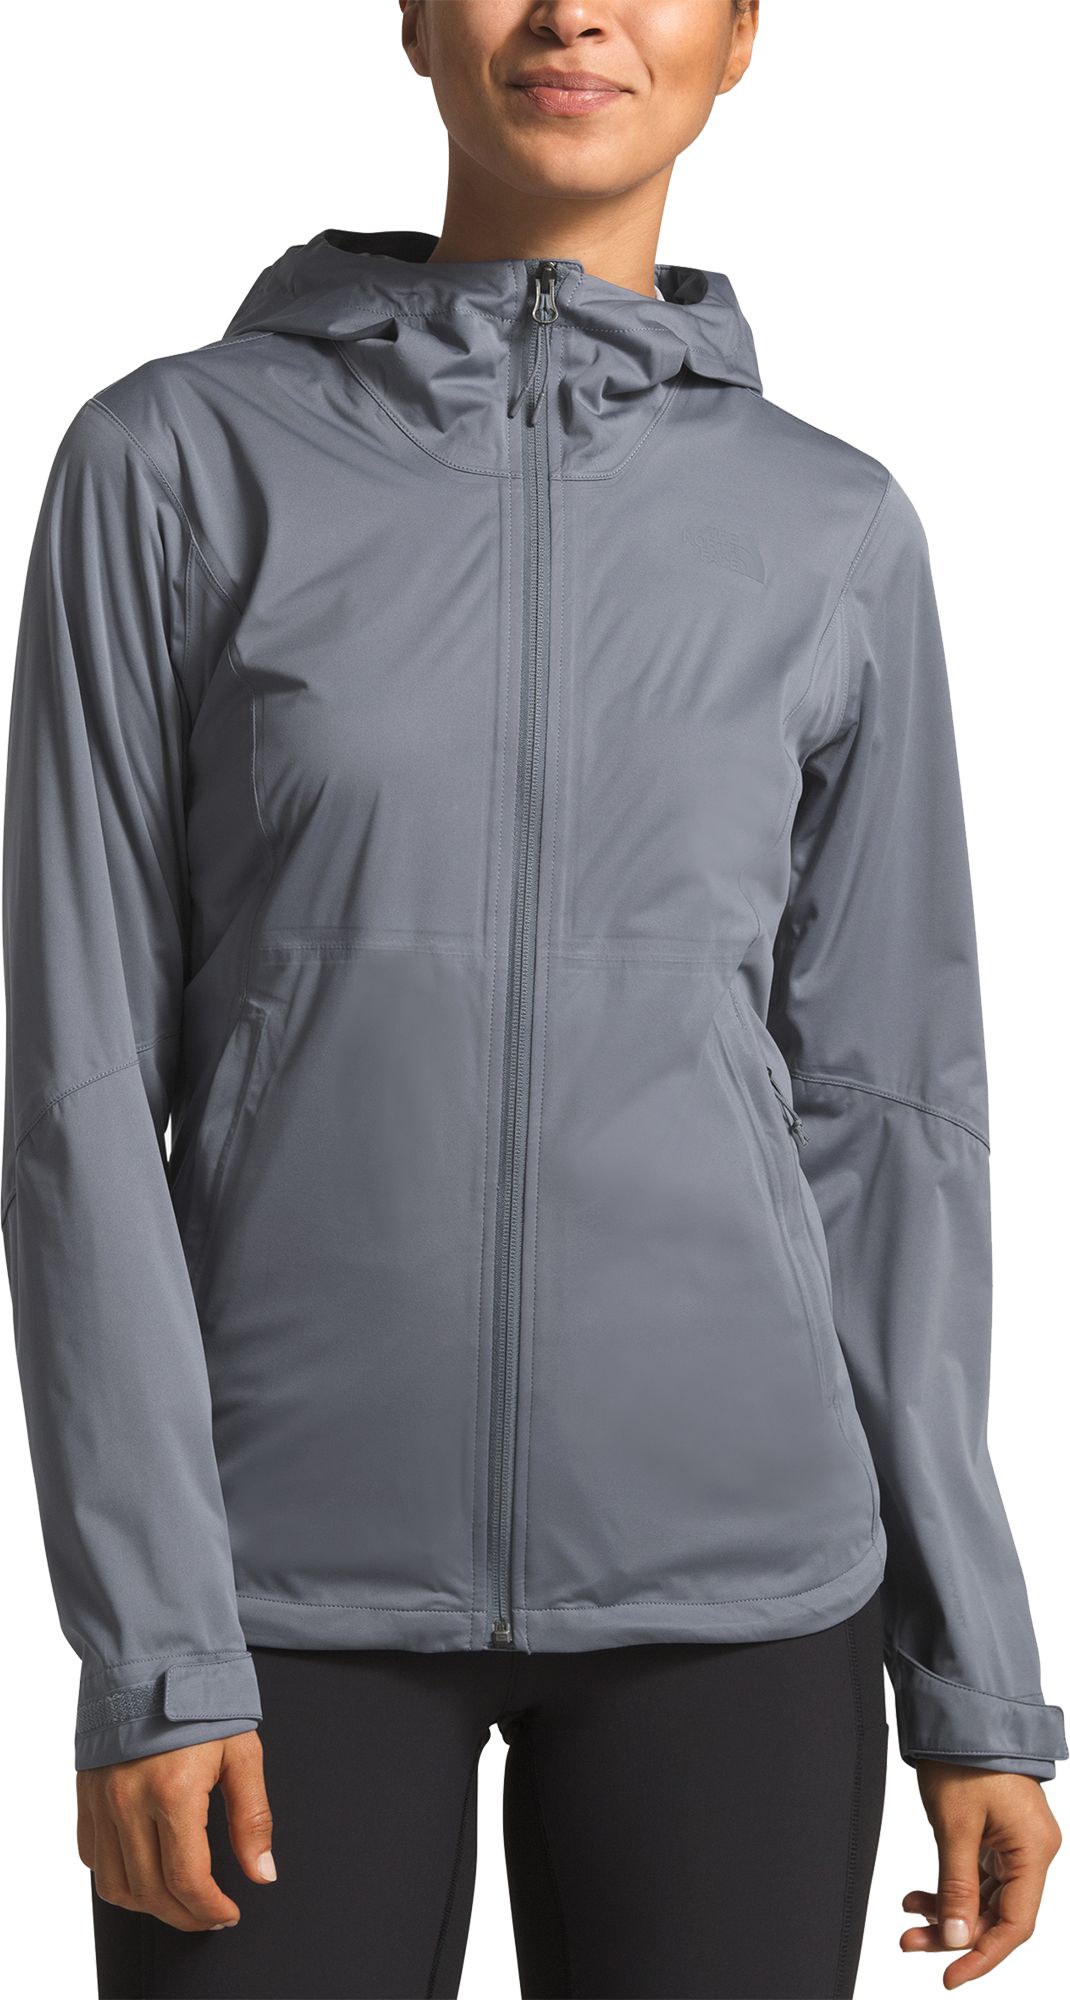 women's allproof stretch jacket